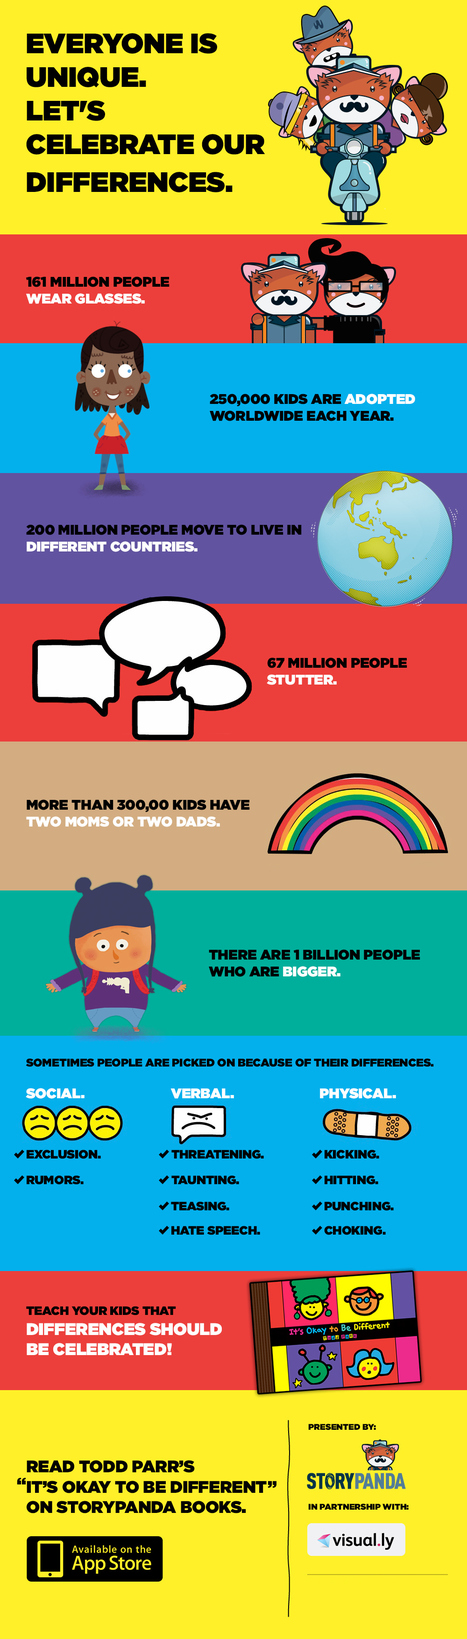 A Must-See Anti-Bullying Poster Perfect For Classrooms | Education Matters - (tech and non-tech) | Scoop.it